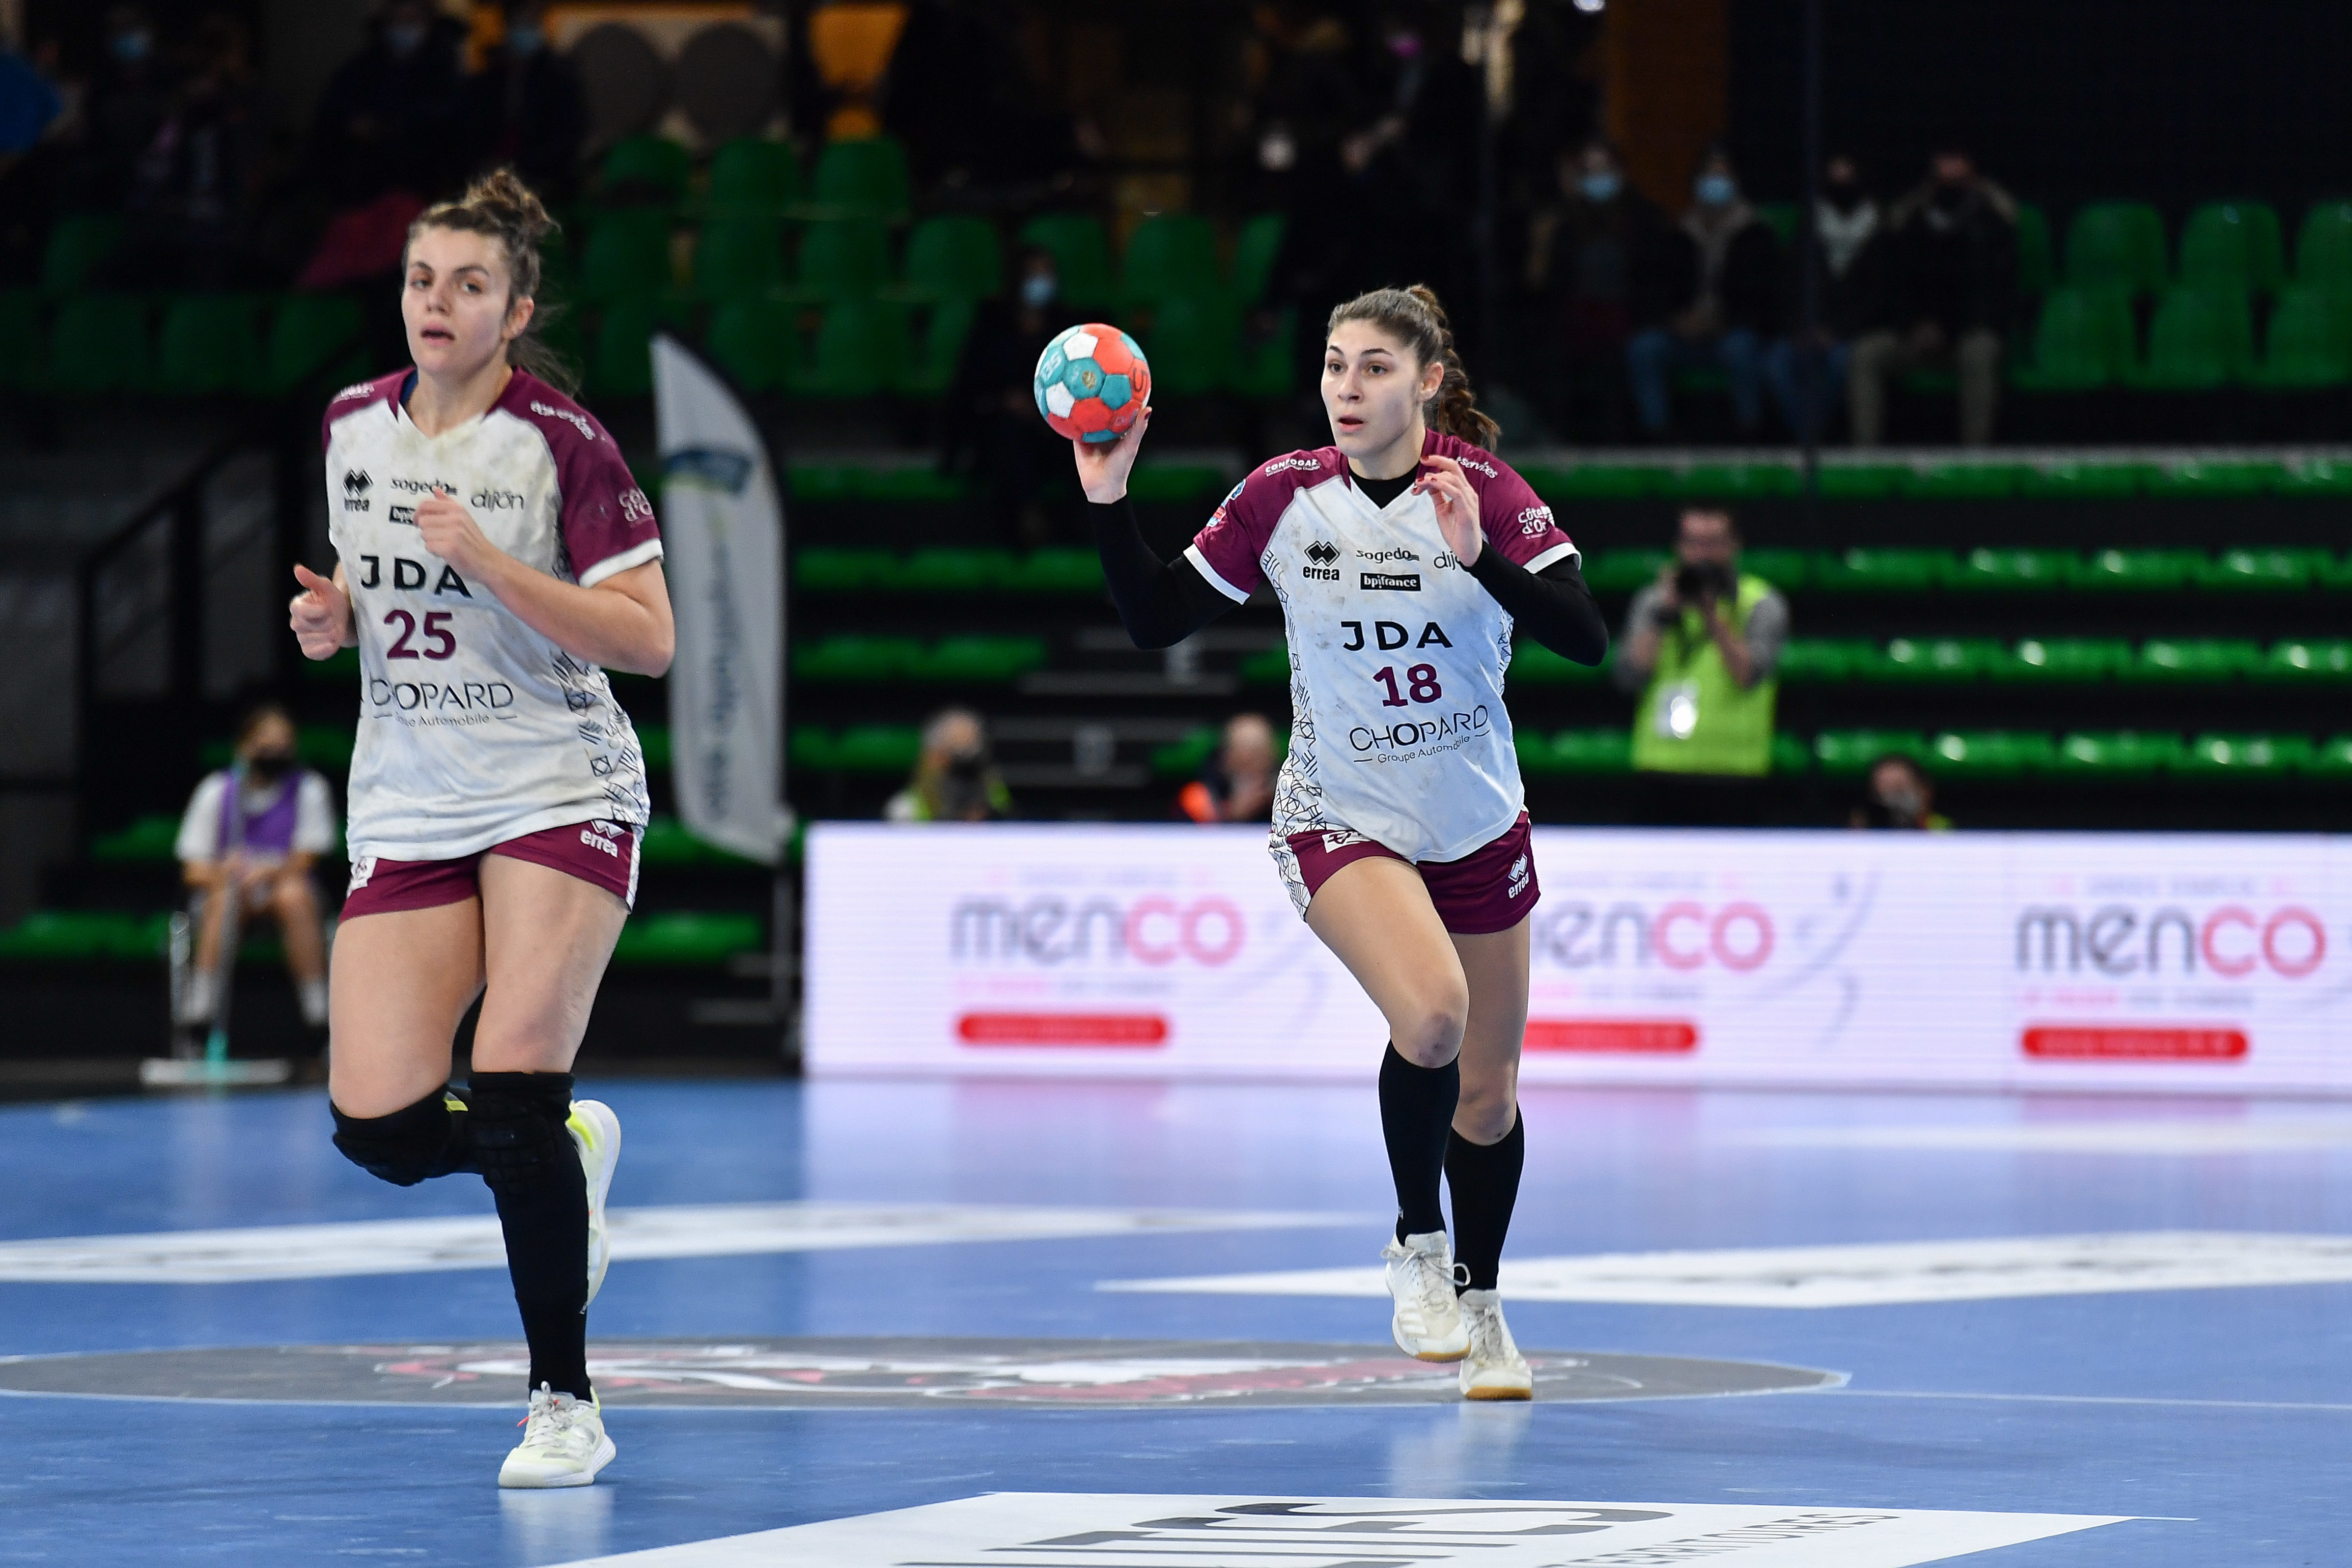 Sarah VALERO JODAR of Dijon and Ilona DI ROCCO of Dijon during the Ligue Butagaz Energie match between Nantes and Dijon on January 12, 2022 in Nantes, France. (Photo by Franco Arland/Icon Sport)